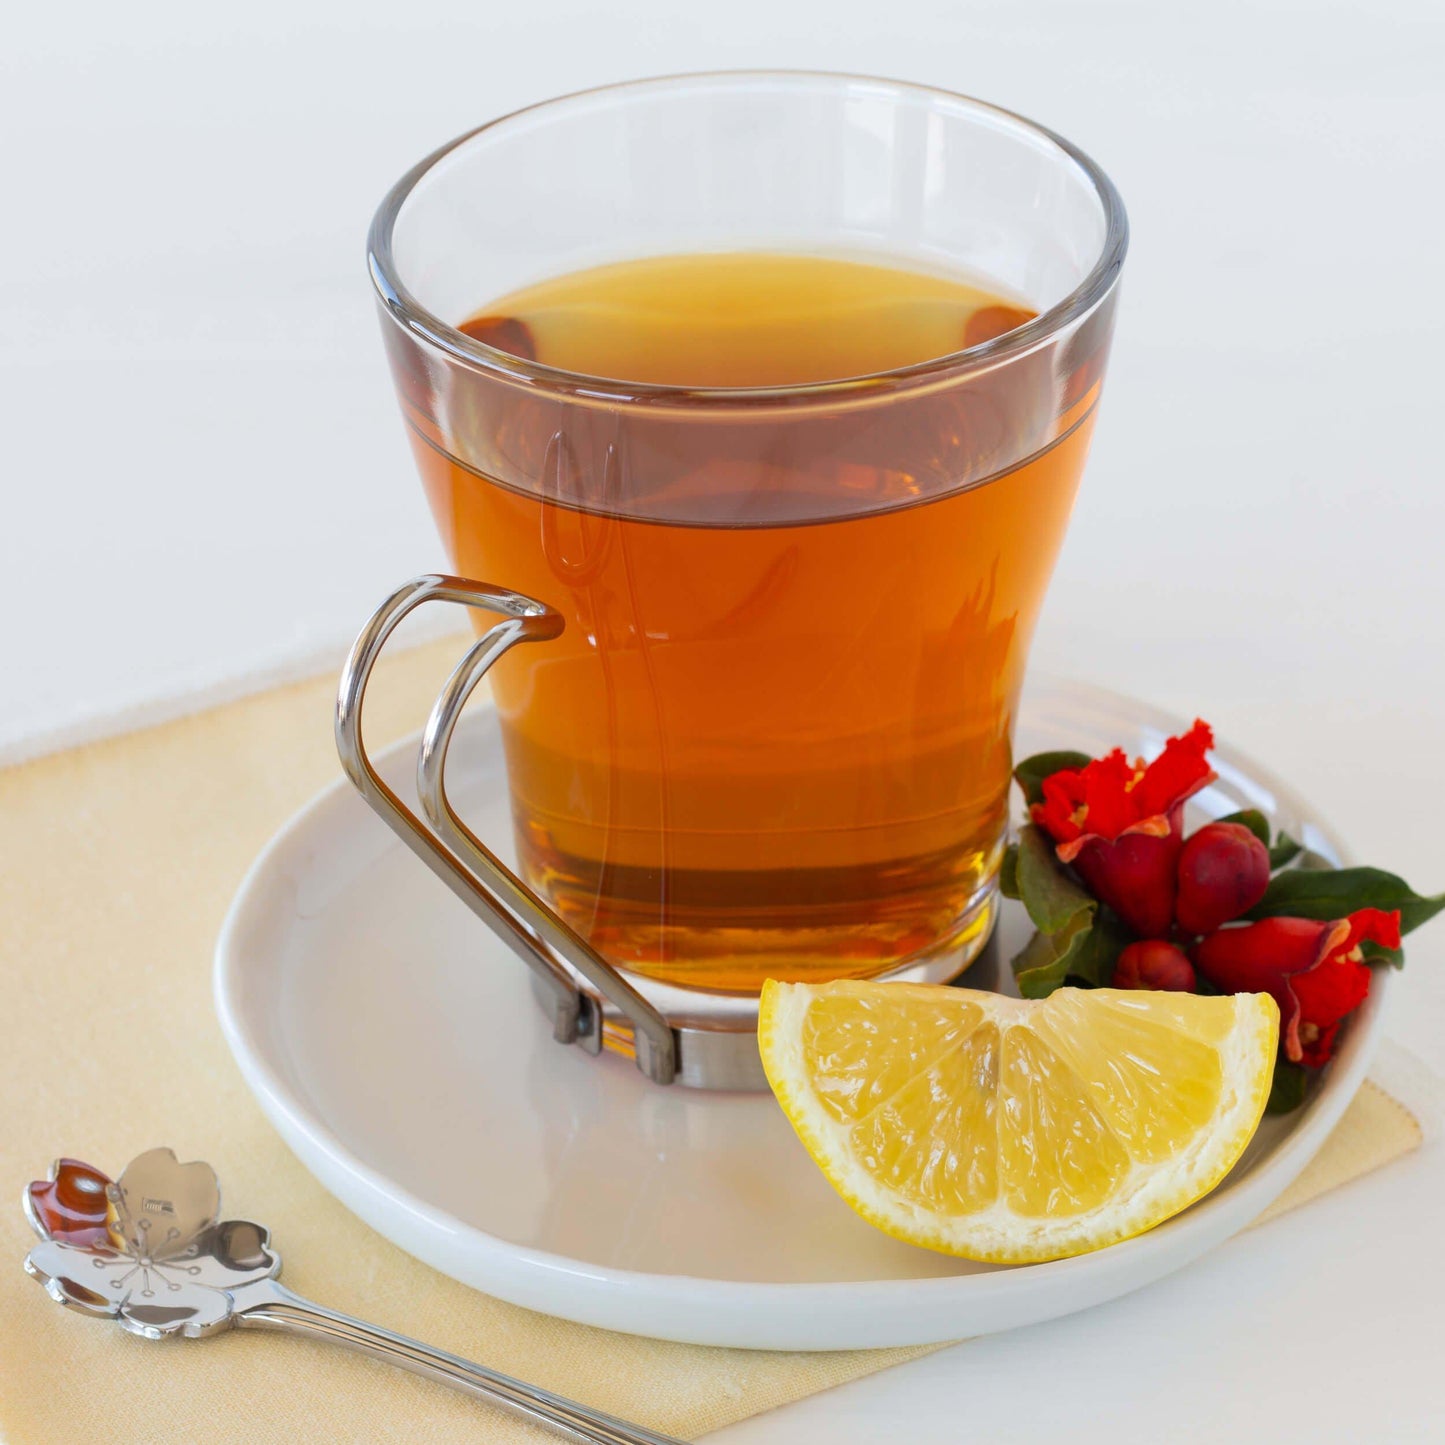 Pomegranate Lemon Organic Black Tea shown as brewed tea in a glass mug with a metal handle, on a white dish with a lemon wedge and red blossoms